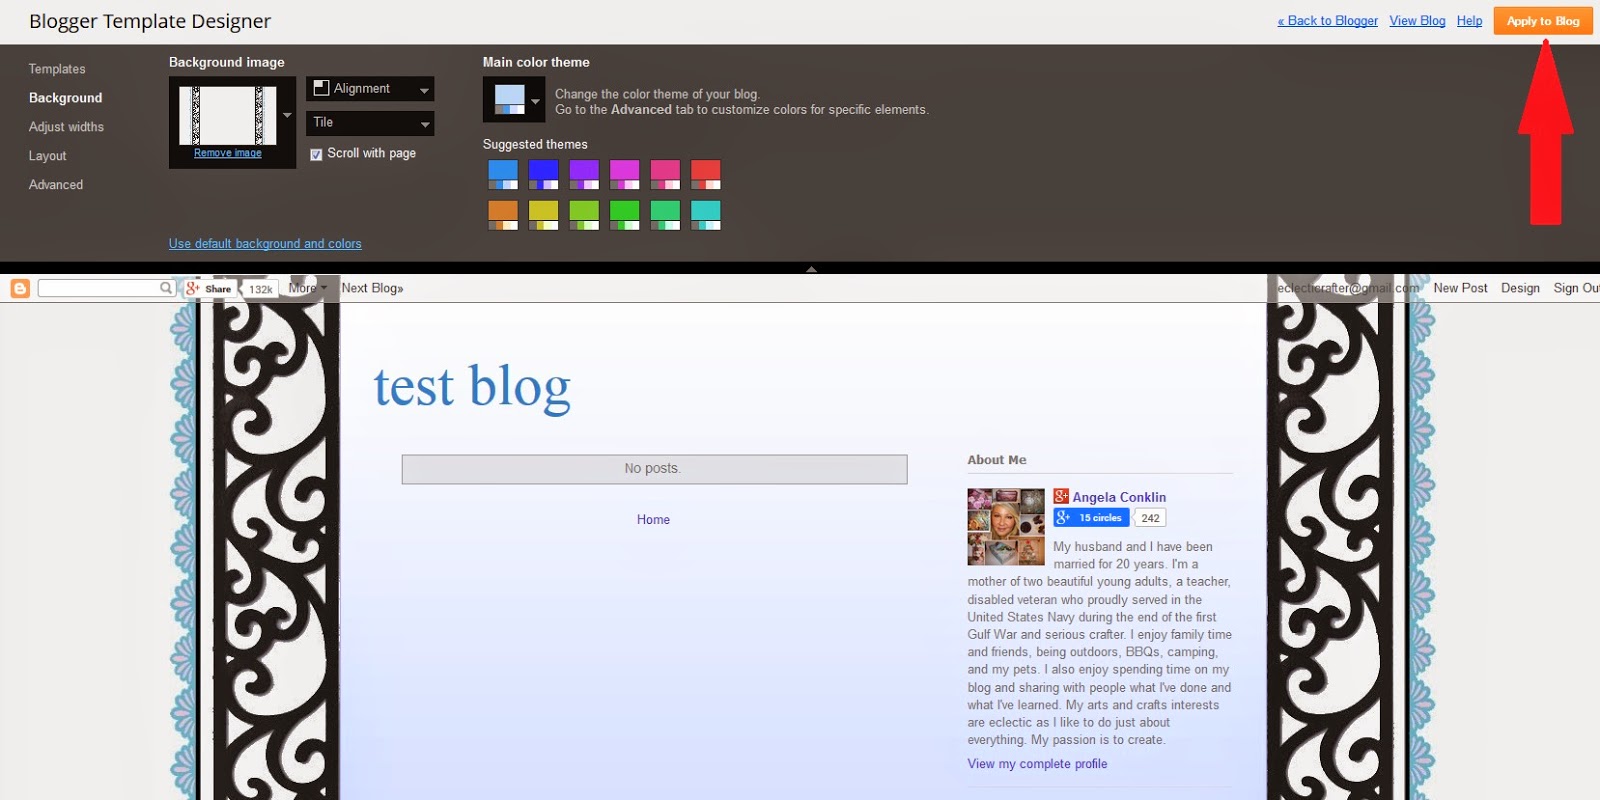 Upload Your New (Made by You) Background Image to Your Blog